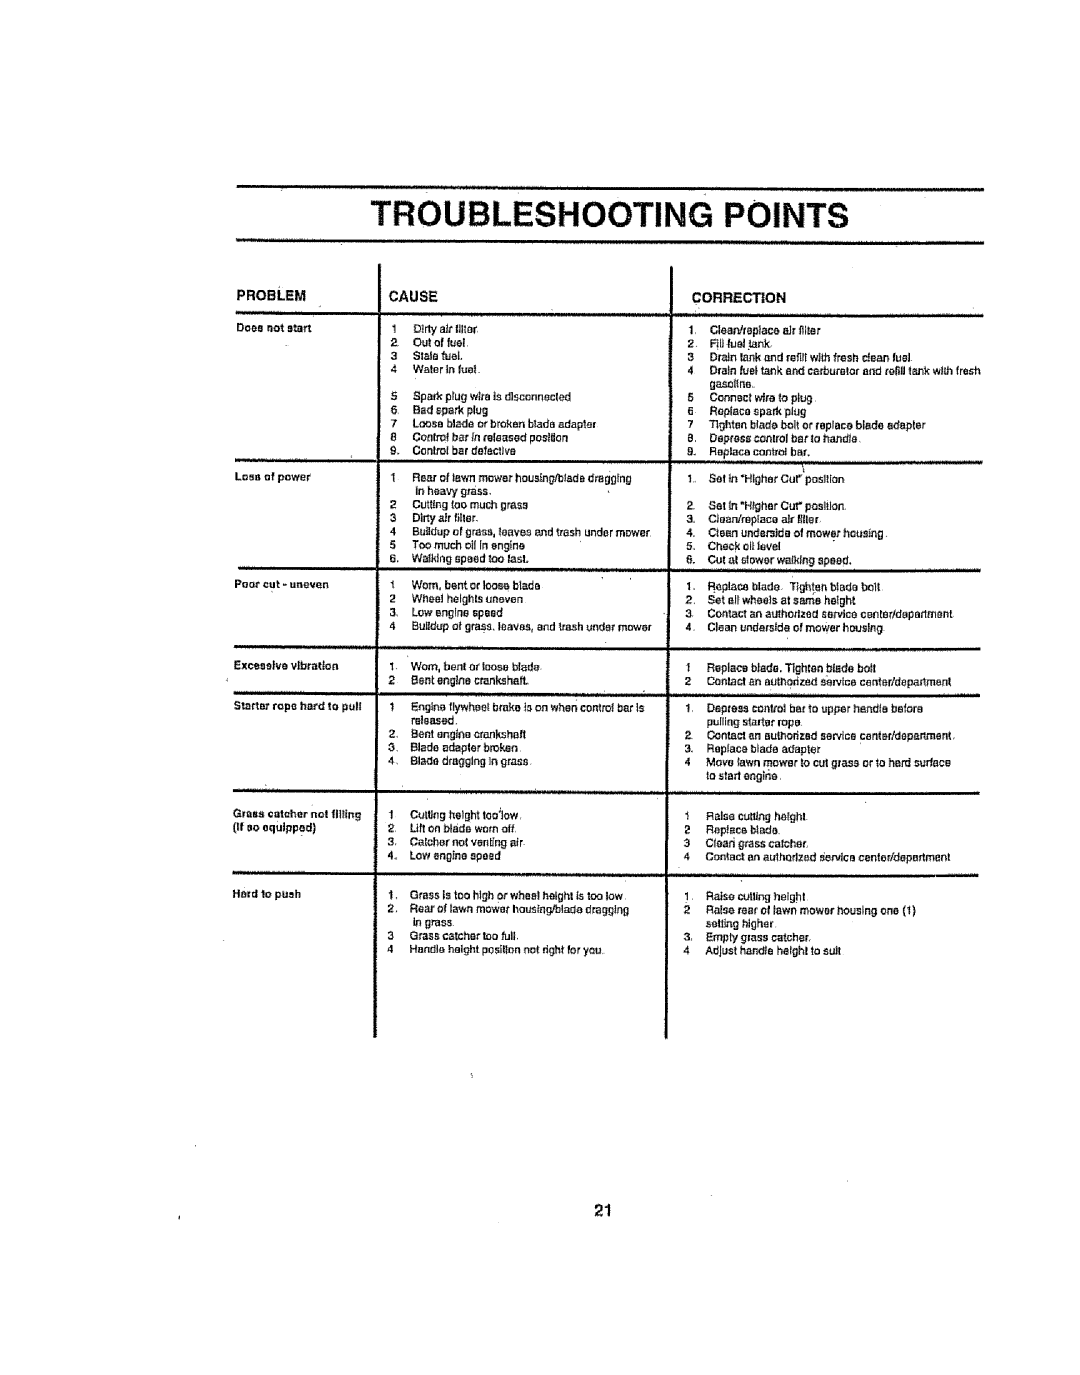 Sears 917386121 owner manual Troubleshooting Points, Cause, Contact an authQdzed servlcecentar/dopndmant 